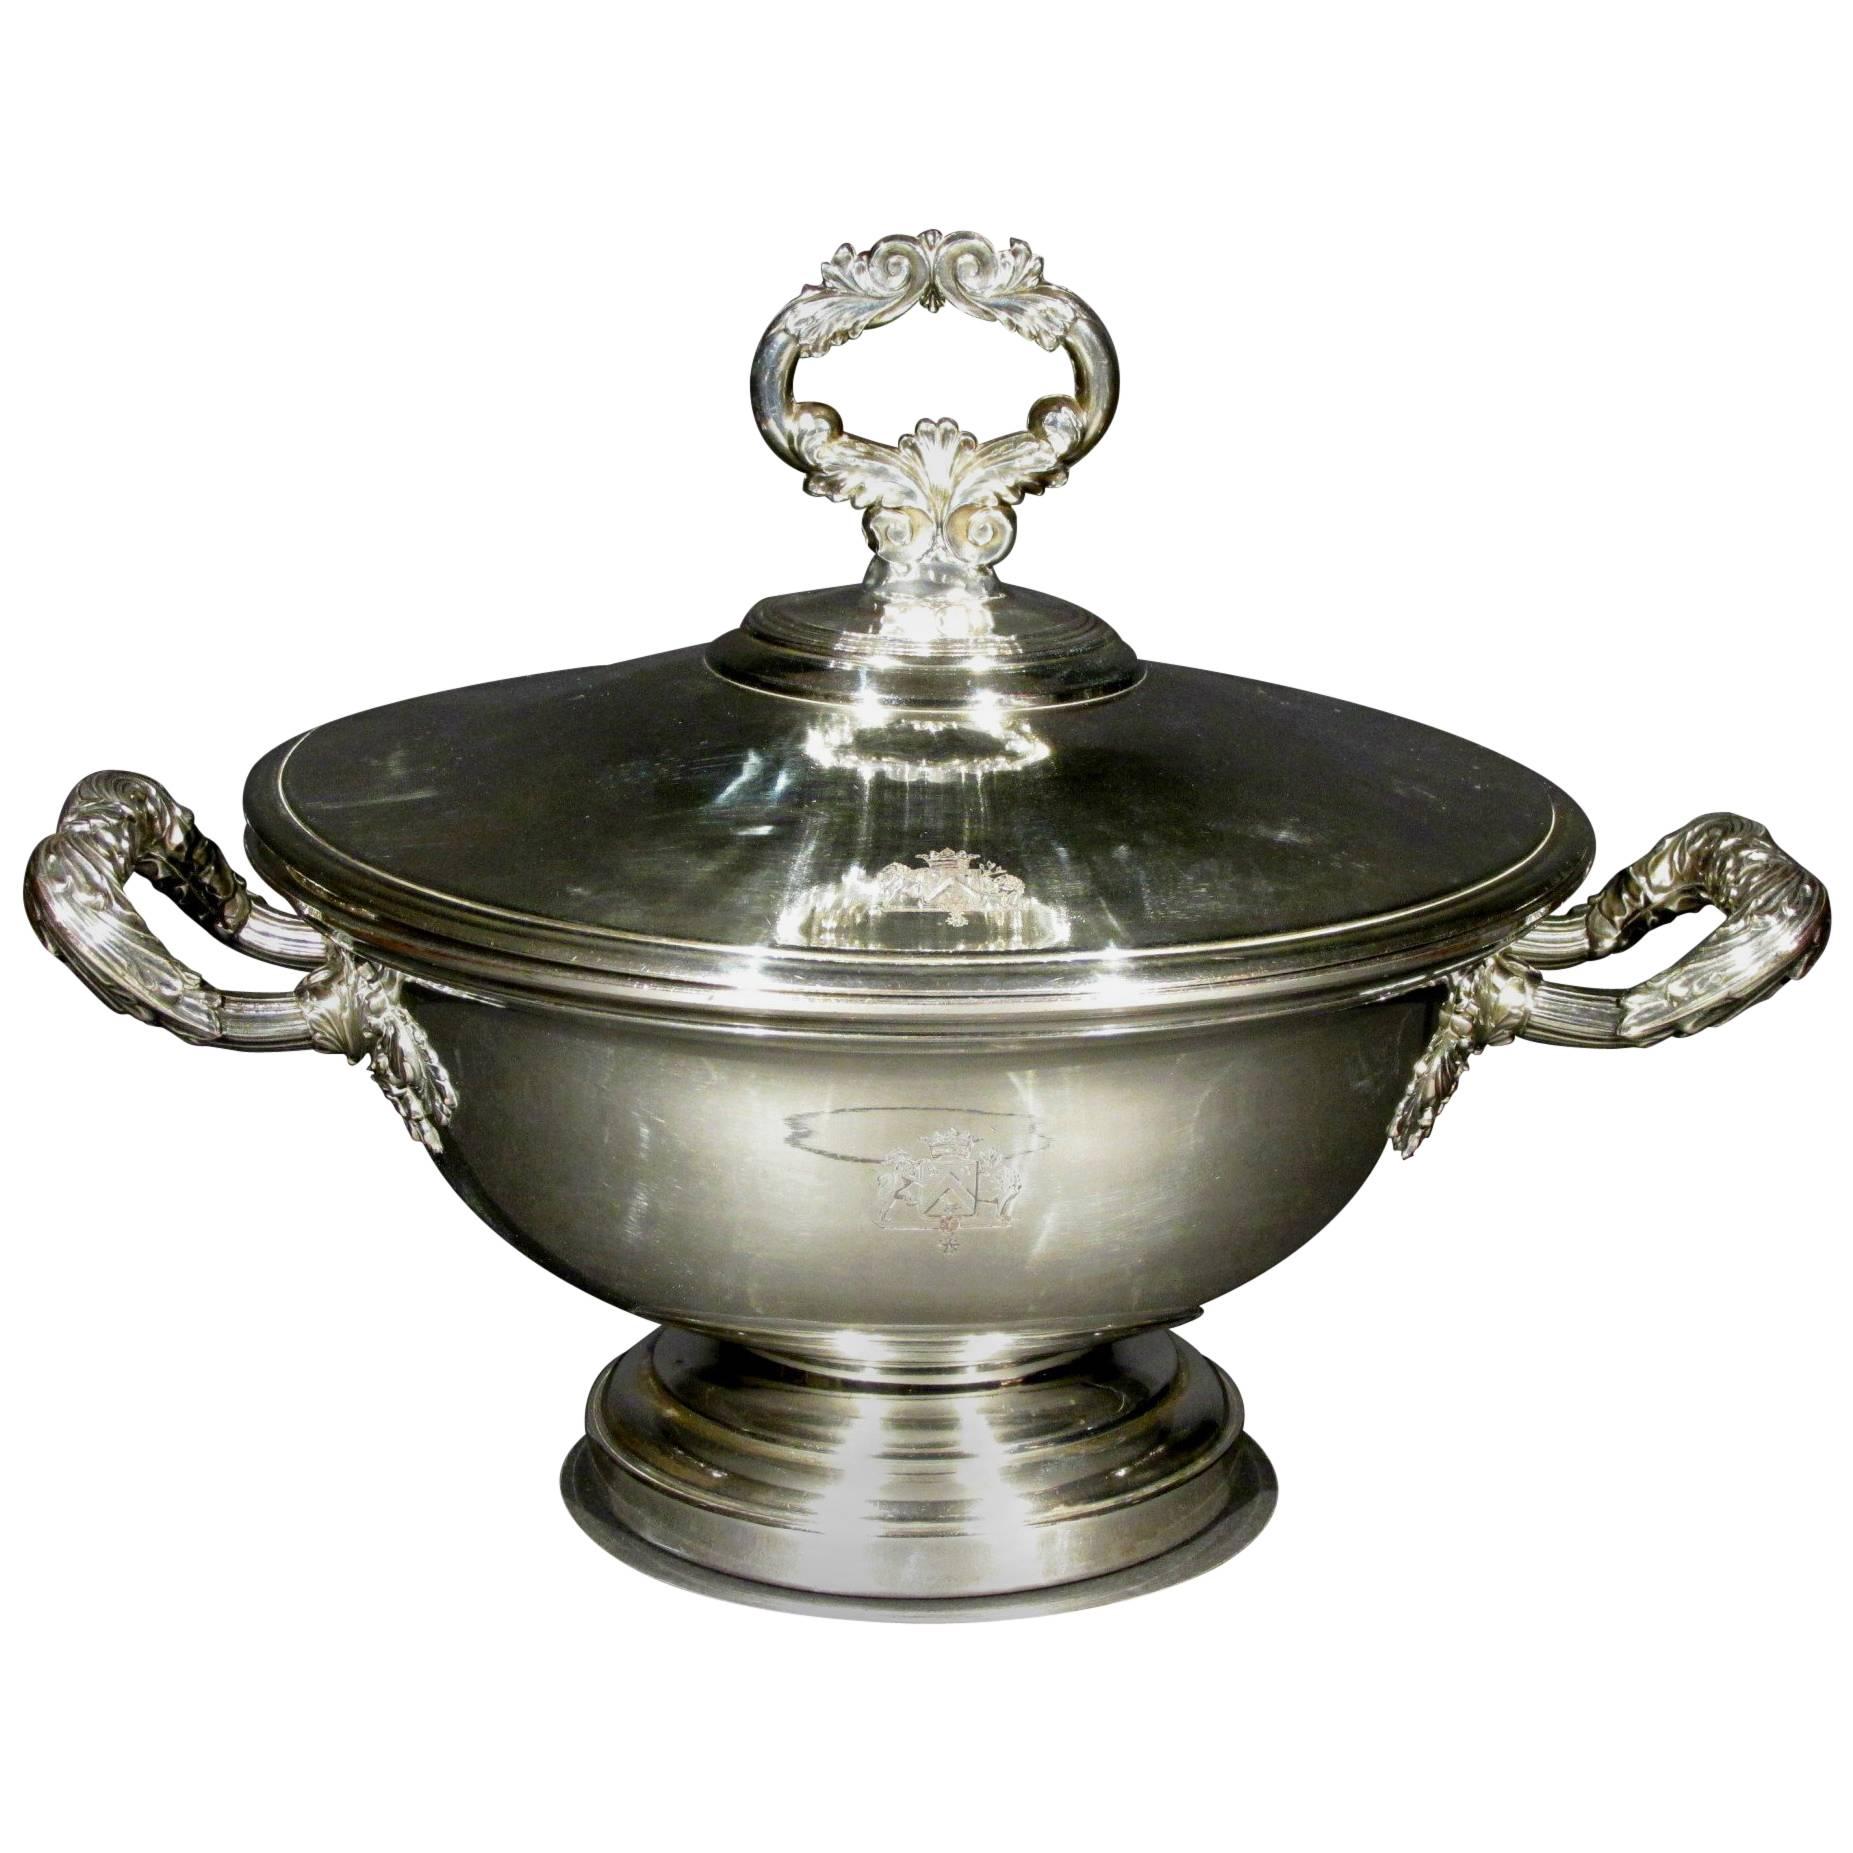 A Rare Early 19th Century Silver Plated Lidded Tureen, France, Circa 1830